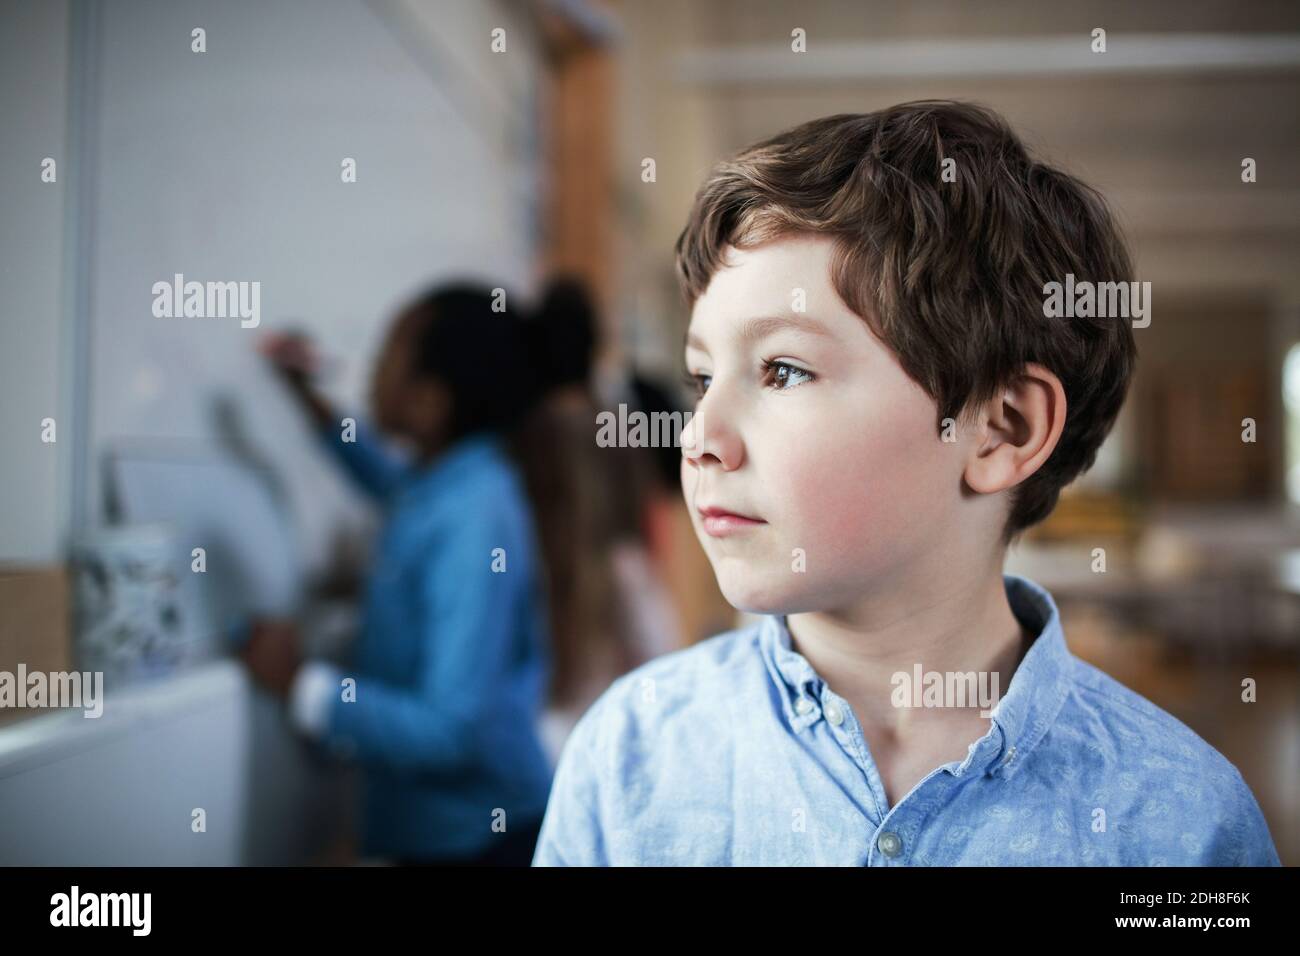 Close-up of male student looking away while standing in classroom Stock Photo